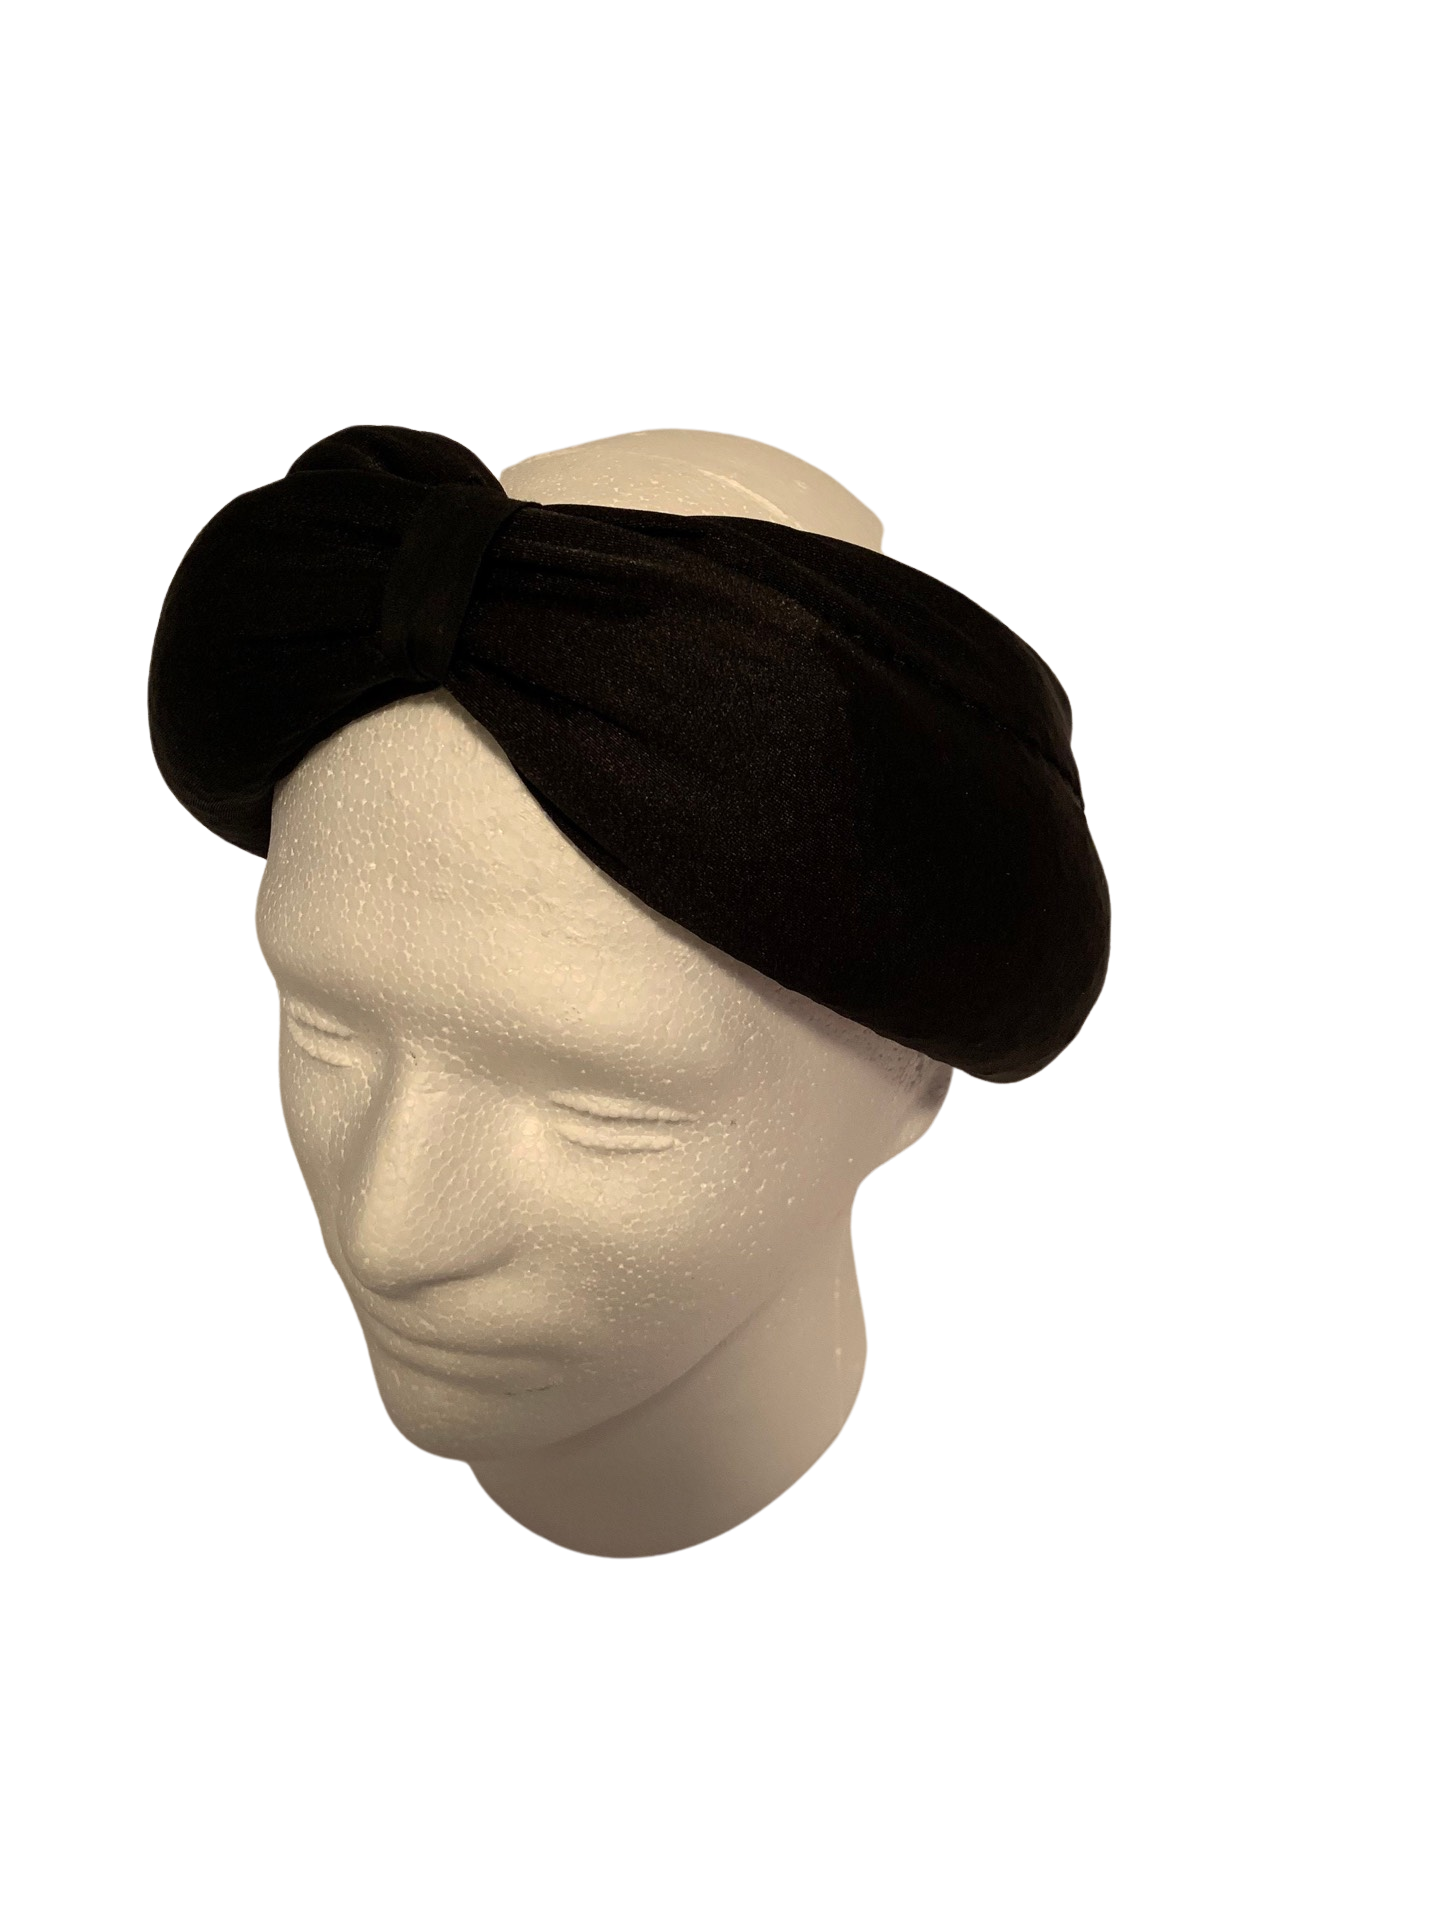 Weighted headband with compression in various colors, weighted hat, scarf, washable